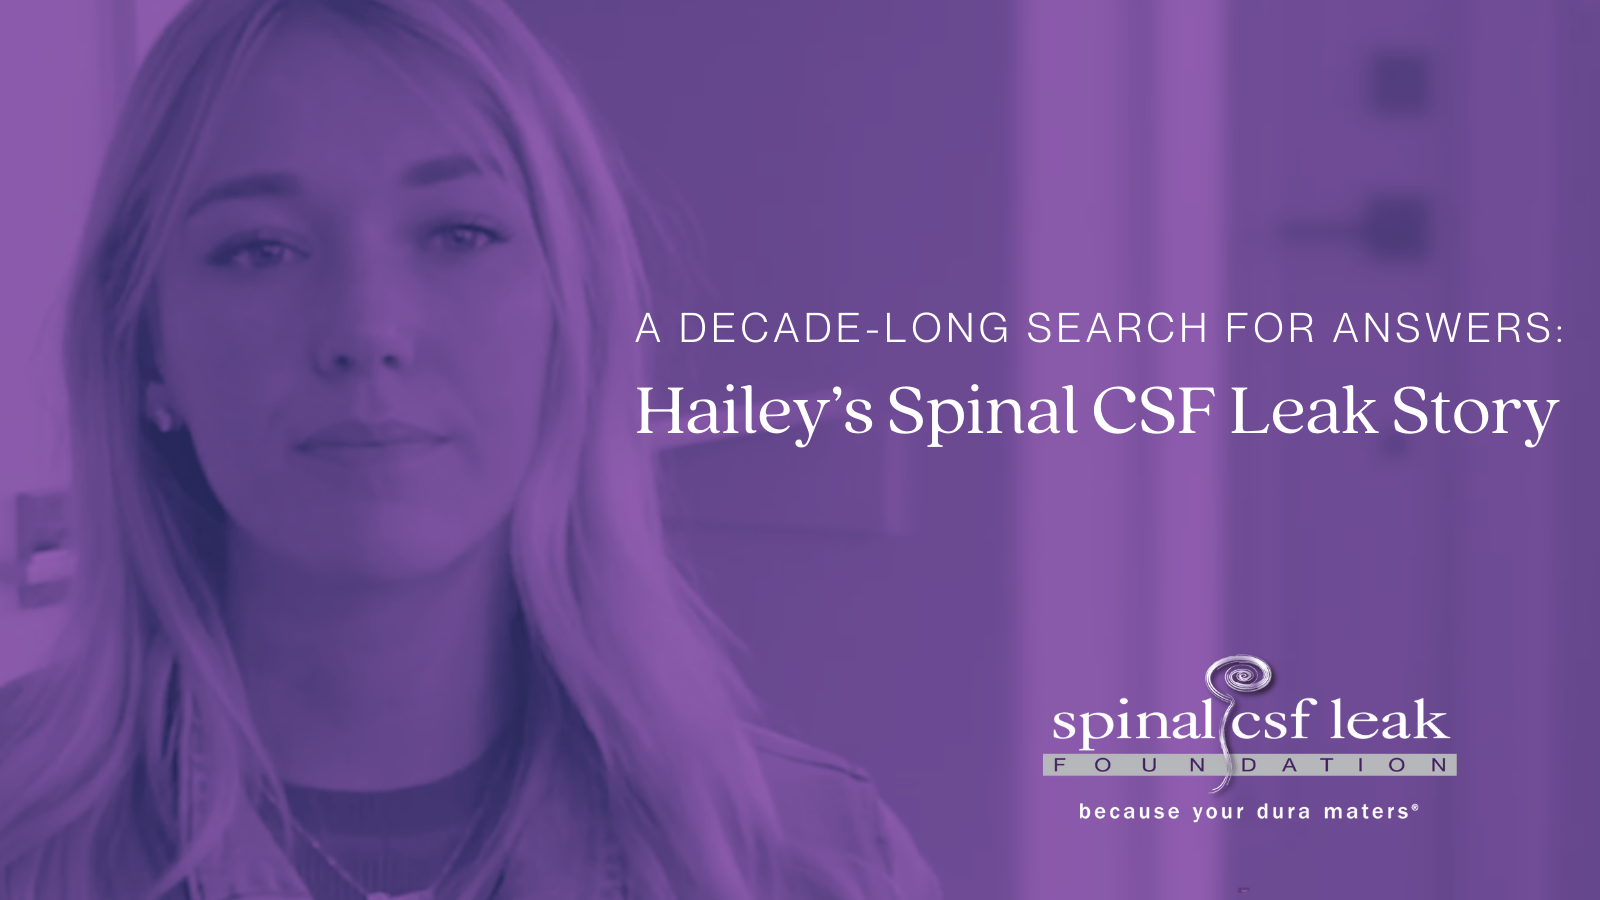 A decade-long search for answers: Hailey’s spinal CSF leak story